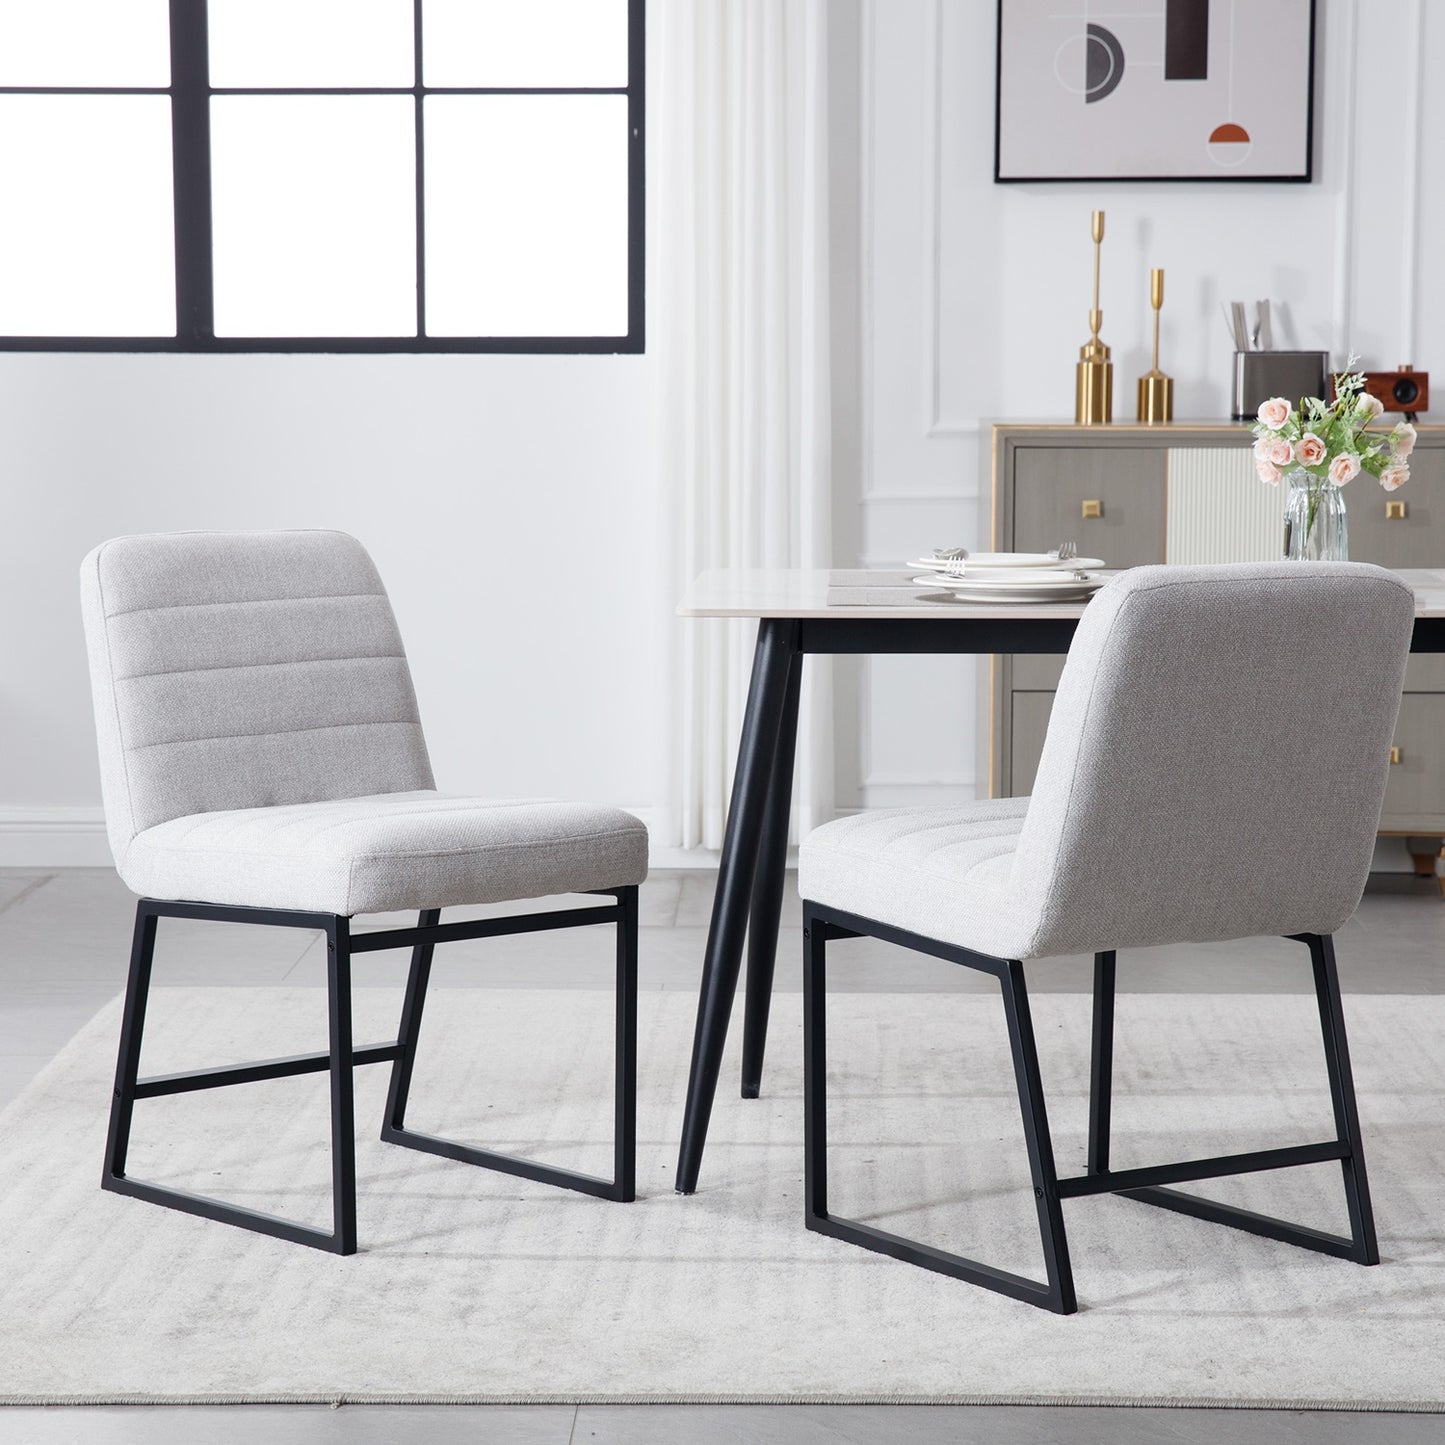 1st Choice Elevate Your Dining Room with Our Elegant Beige Linen Chair